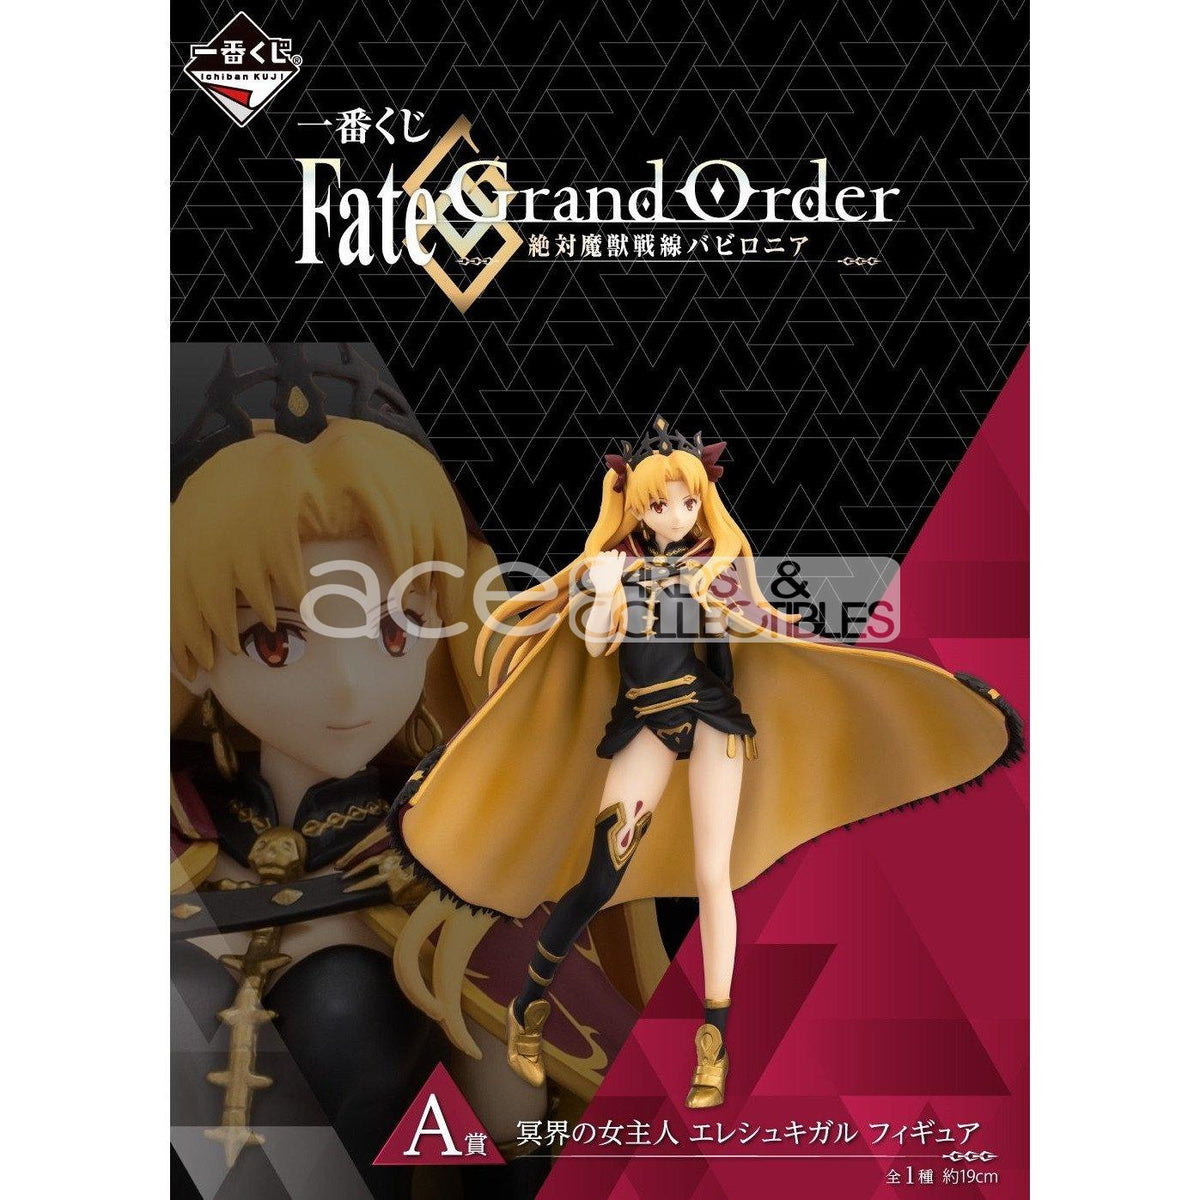 Ichiban Kuji Fate/Grand Order -Absolute Demonic Front: Babylonia-Bandai-Ace Cards &amp; Collectibles